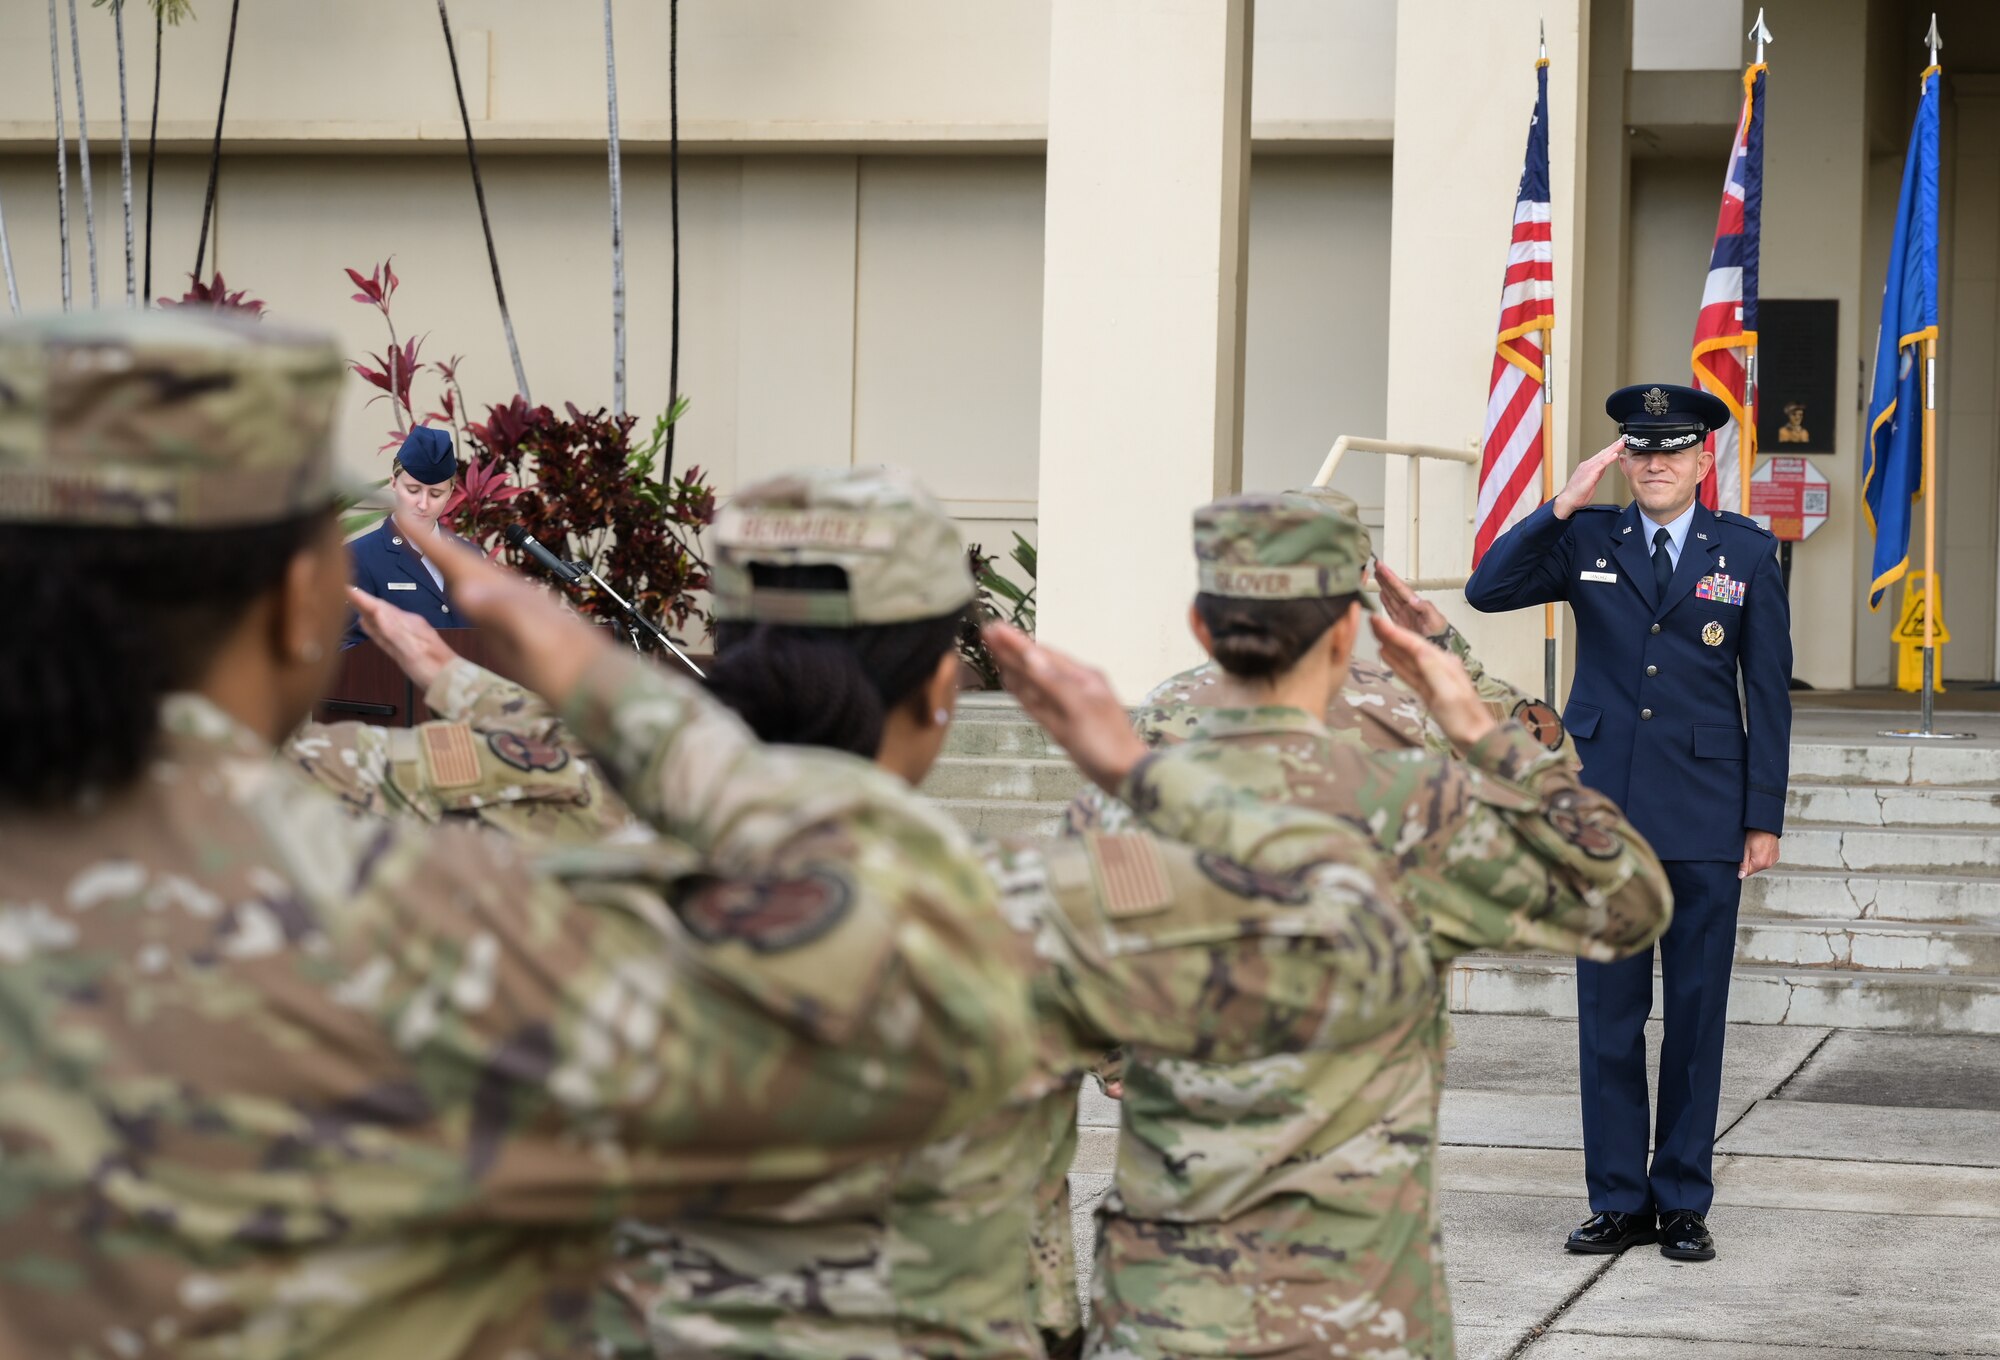 Lt. Col. Joseph Sanchez, 15th Healthcare Operations Squadron commander, receives his first salute during a change of command ceremony at Joint Base Pearl Harbor-Hickam, Hawaii, July 21, 2022. During the ceremony, a guidon is passed from the former commander to the new commander, representing the transfer of responsibility. (U.S. Air Force photo by Staff Sgt. Alan Ricker)